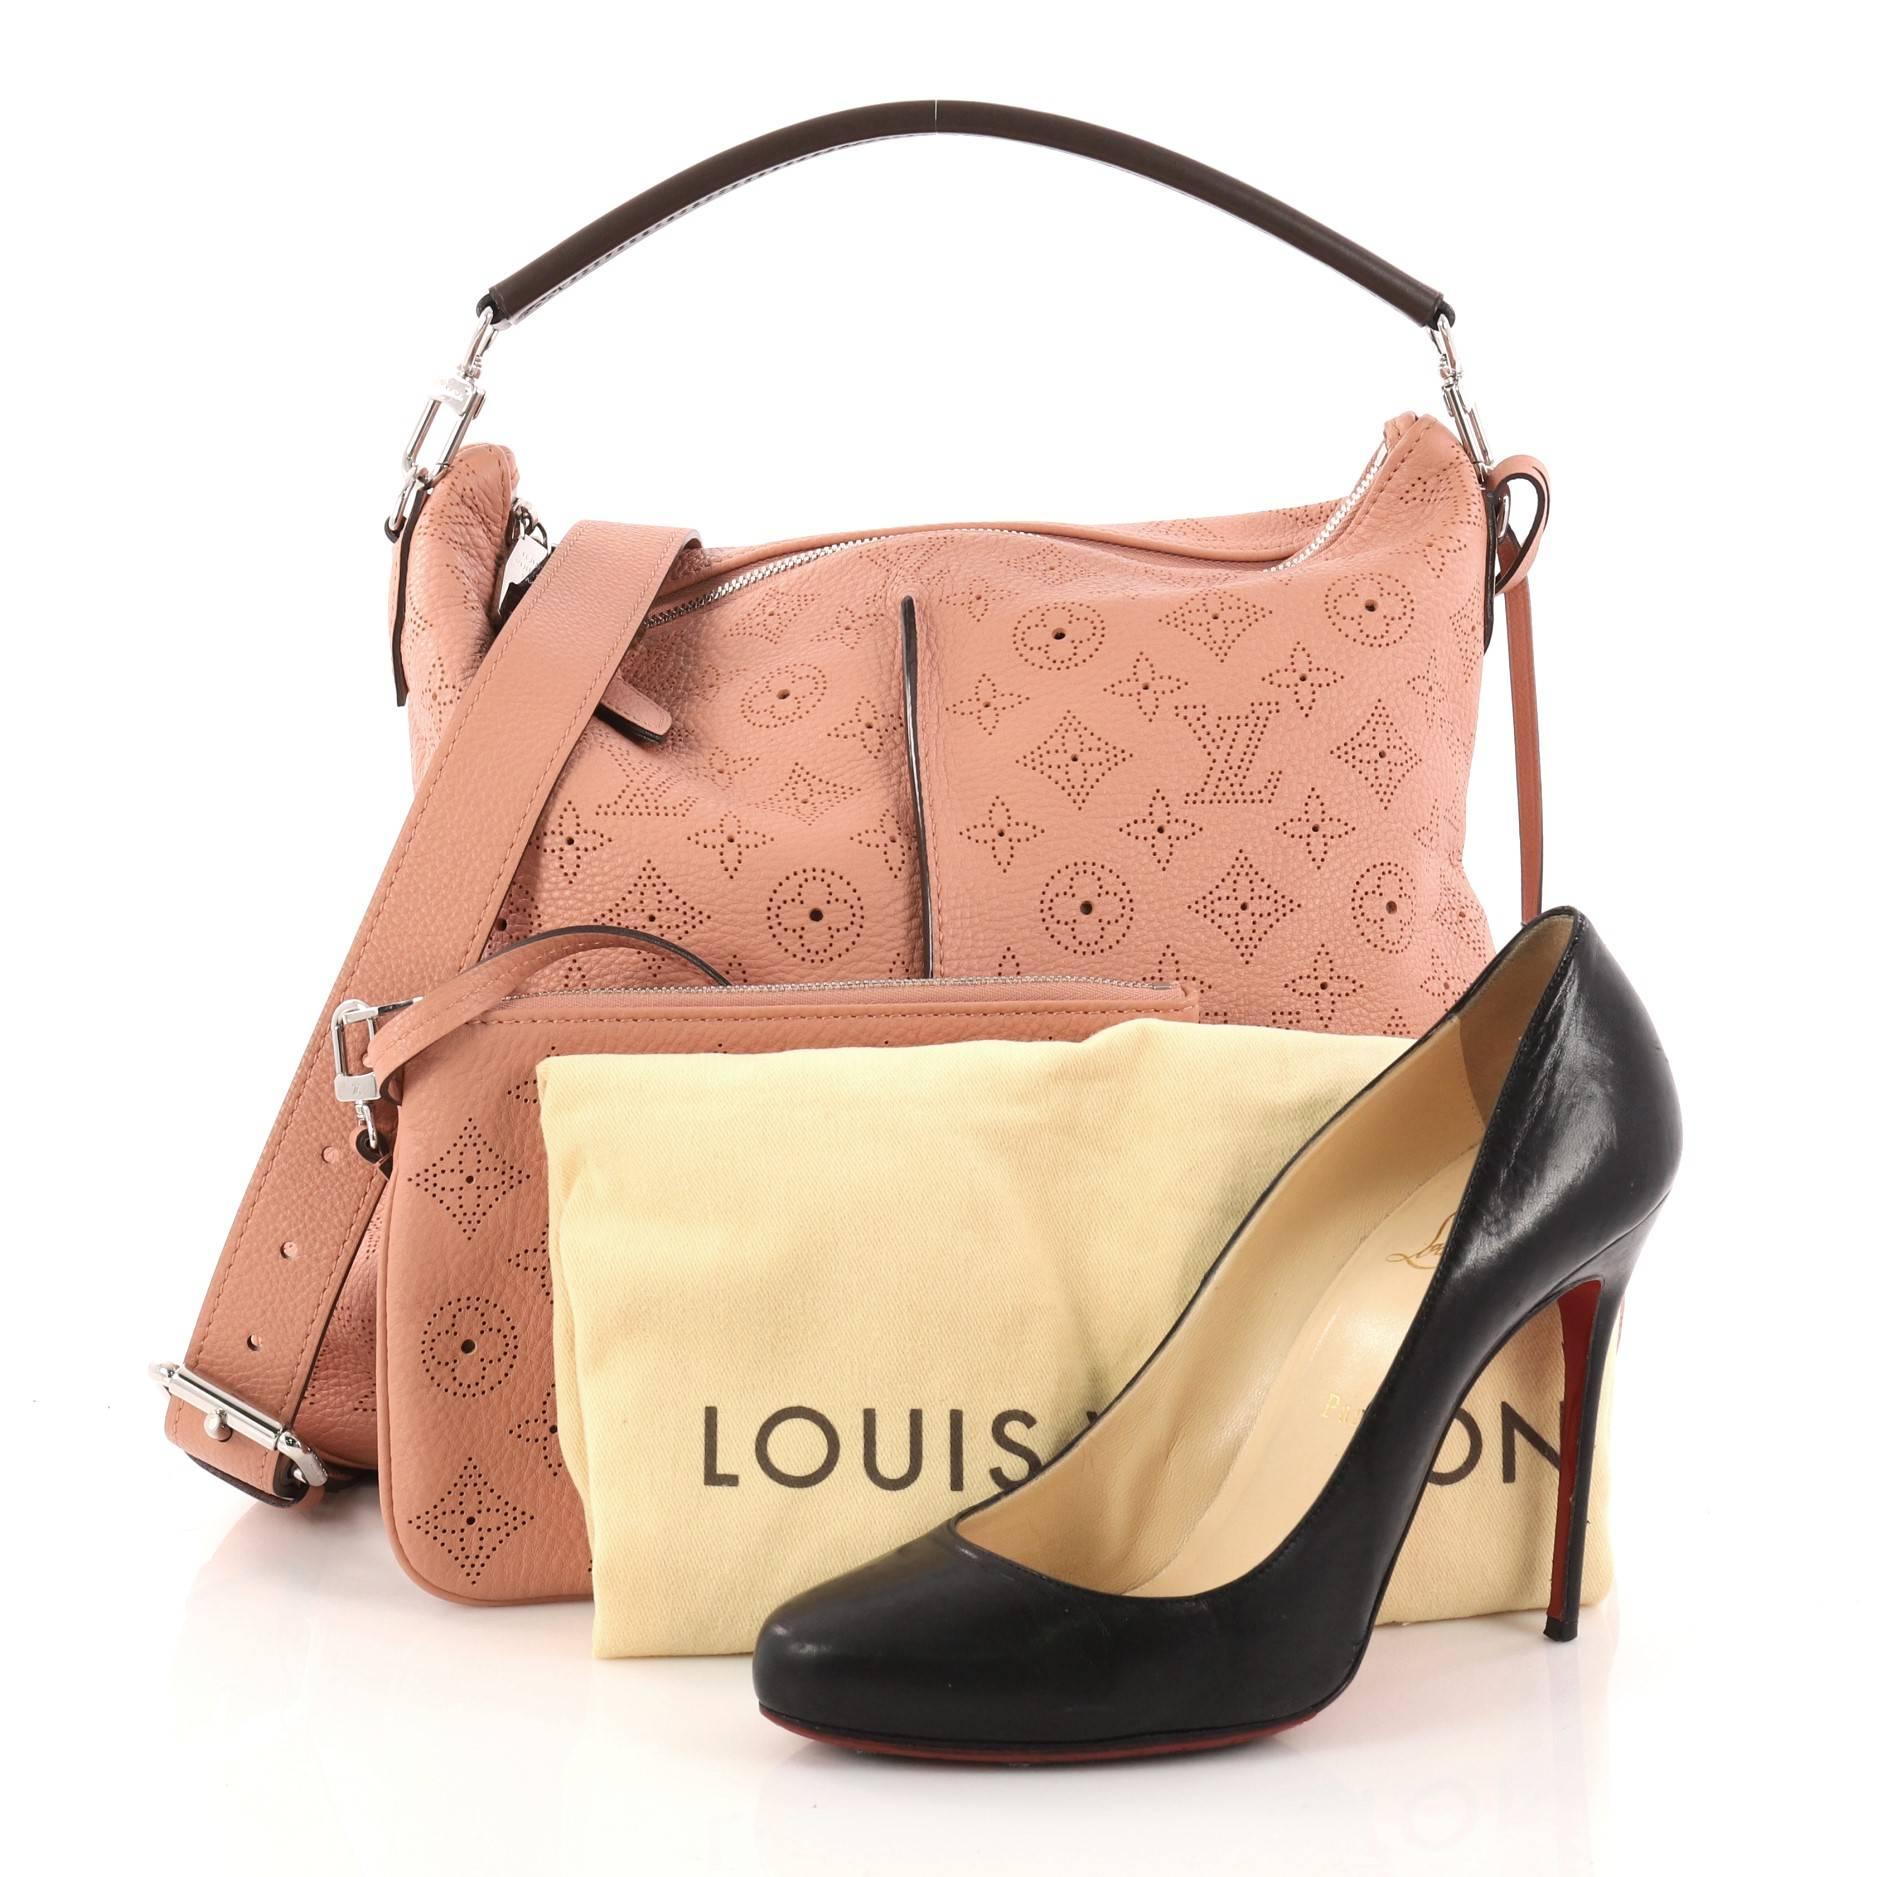 This authentic Louis Vuitton Selene Handbag Mahina Leather PM is a luxe and feminine design. Crafted in pink monogram perforated mahina leather, this beautiful hobo features a single loop leather handle, detachable leather strap, pleated detailing,